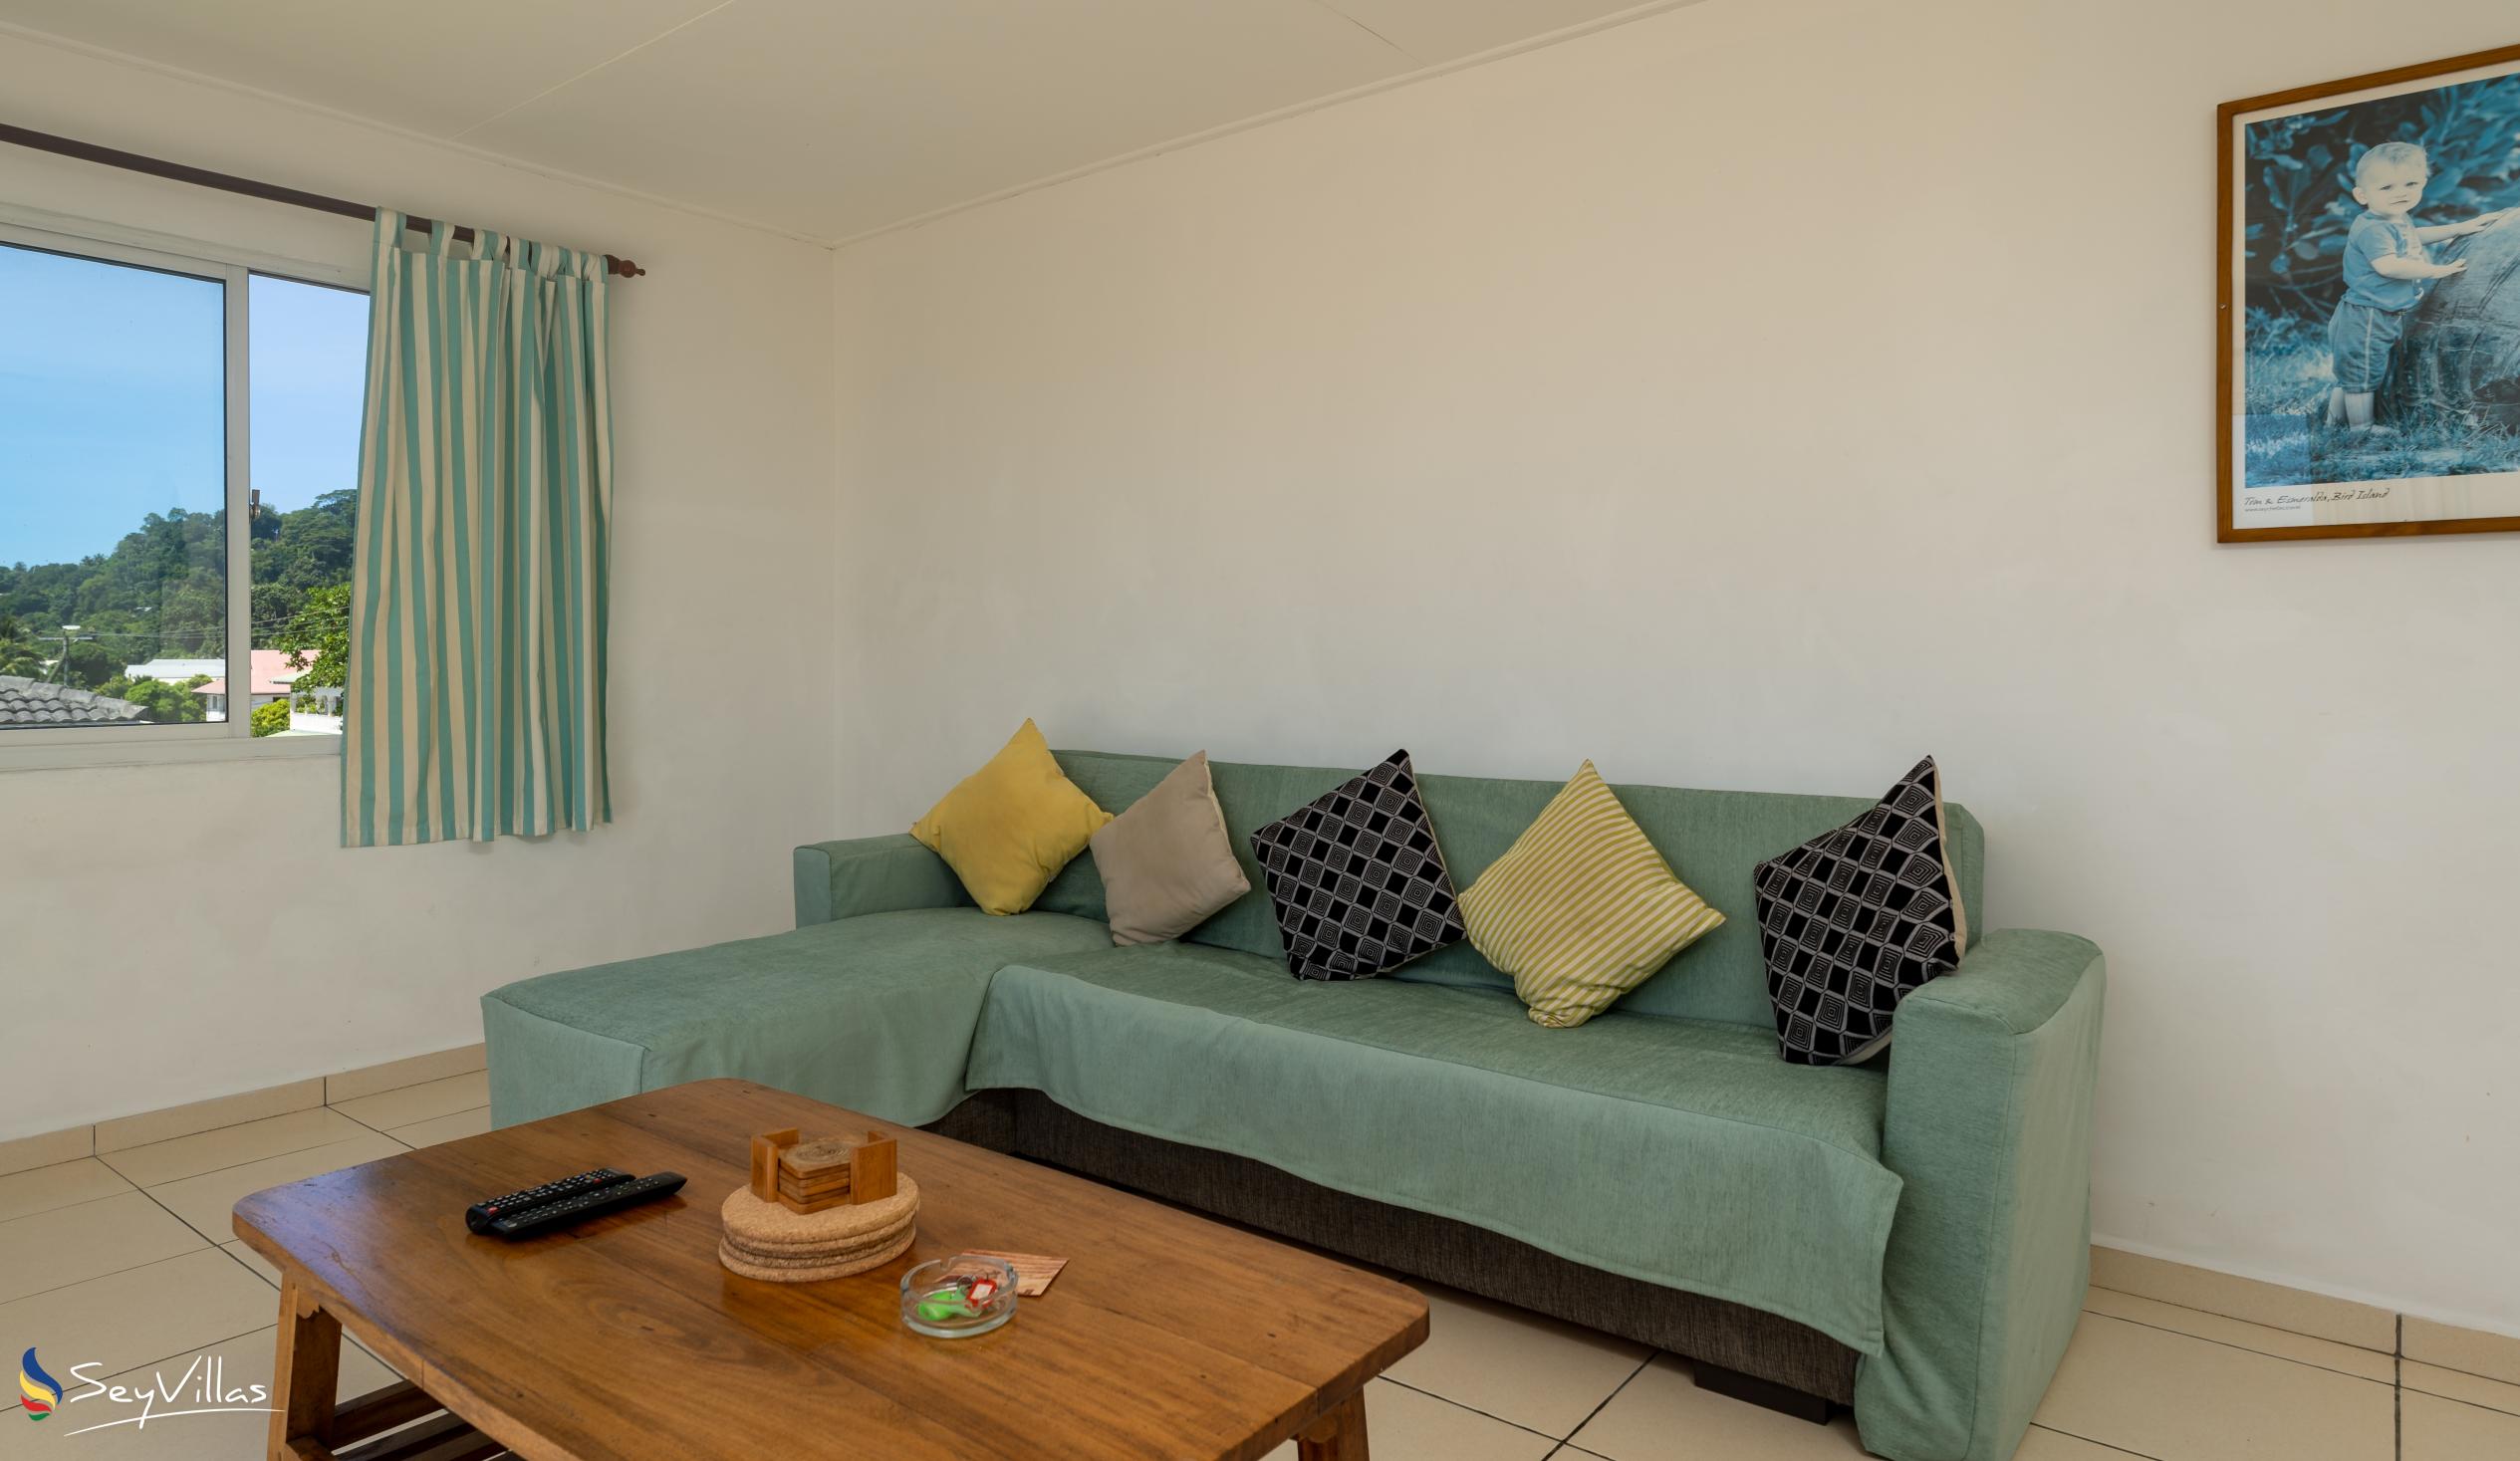 Photo 52: Chez Payet Self Catering - 2-Bedroom Apartment Coco - Mahé (Seychelles)